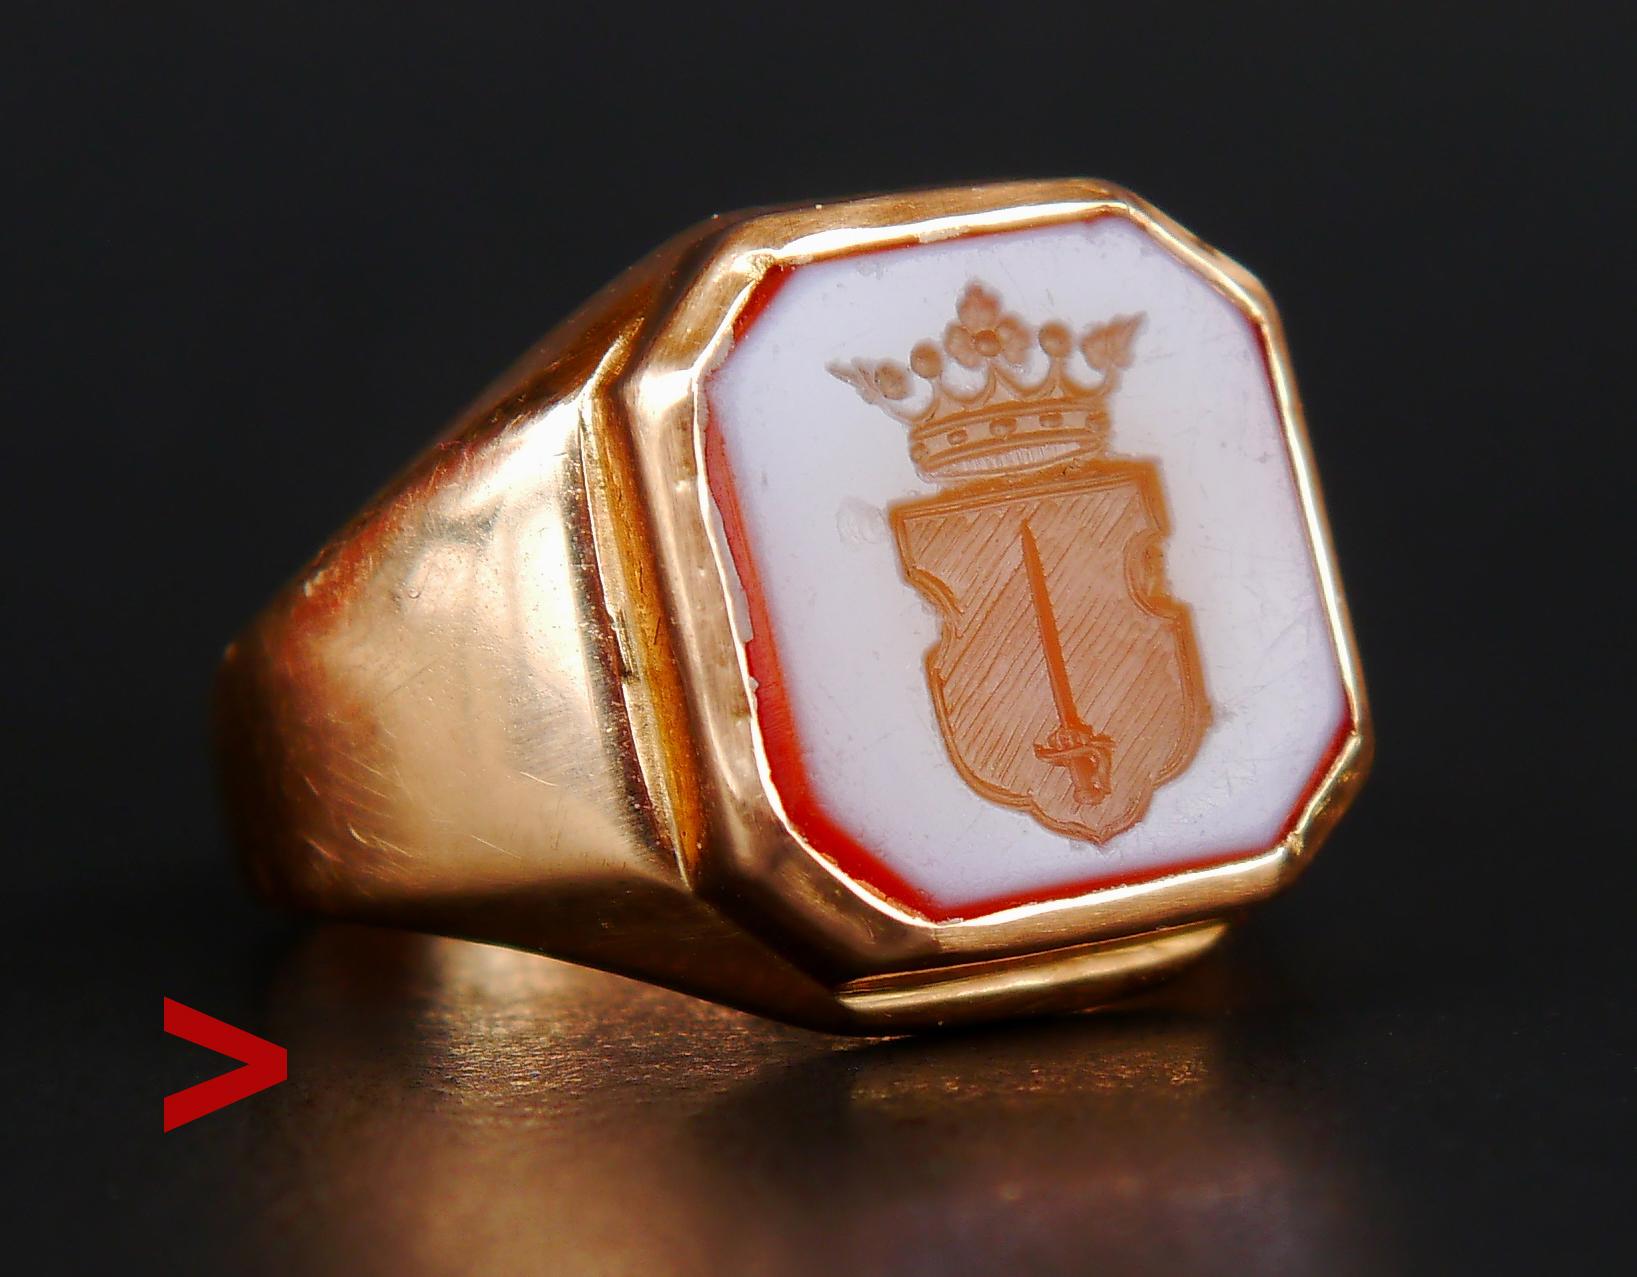 Signet intaglio Ring featuring banded / two layered Carnelian (type of Agate) stone with heraldic depiction of a Sword in the middle of the shield under the crown of Nobility. This is a Coat of Arms of Swedish noble family of Gyllensvärd ( Golden